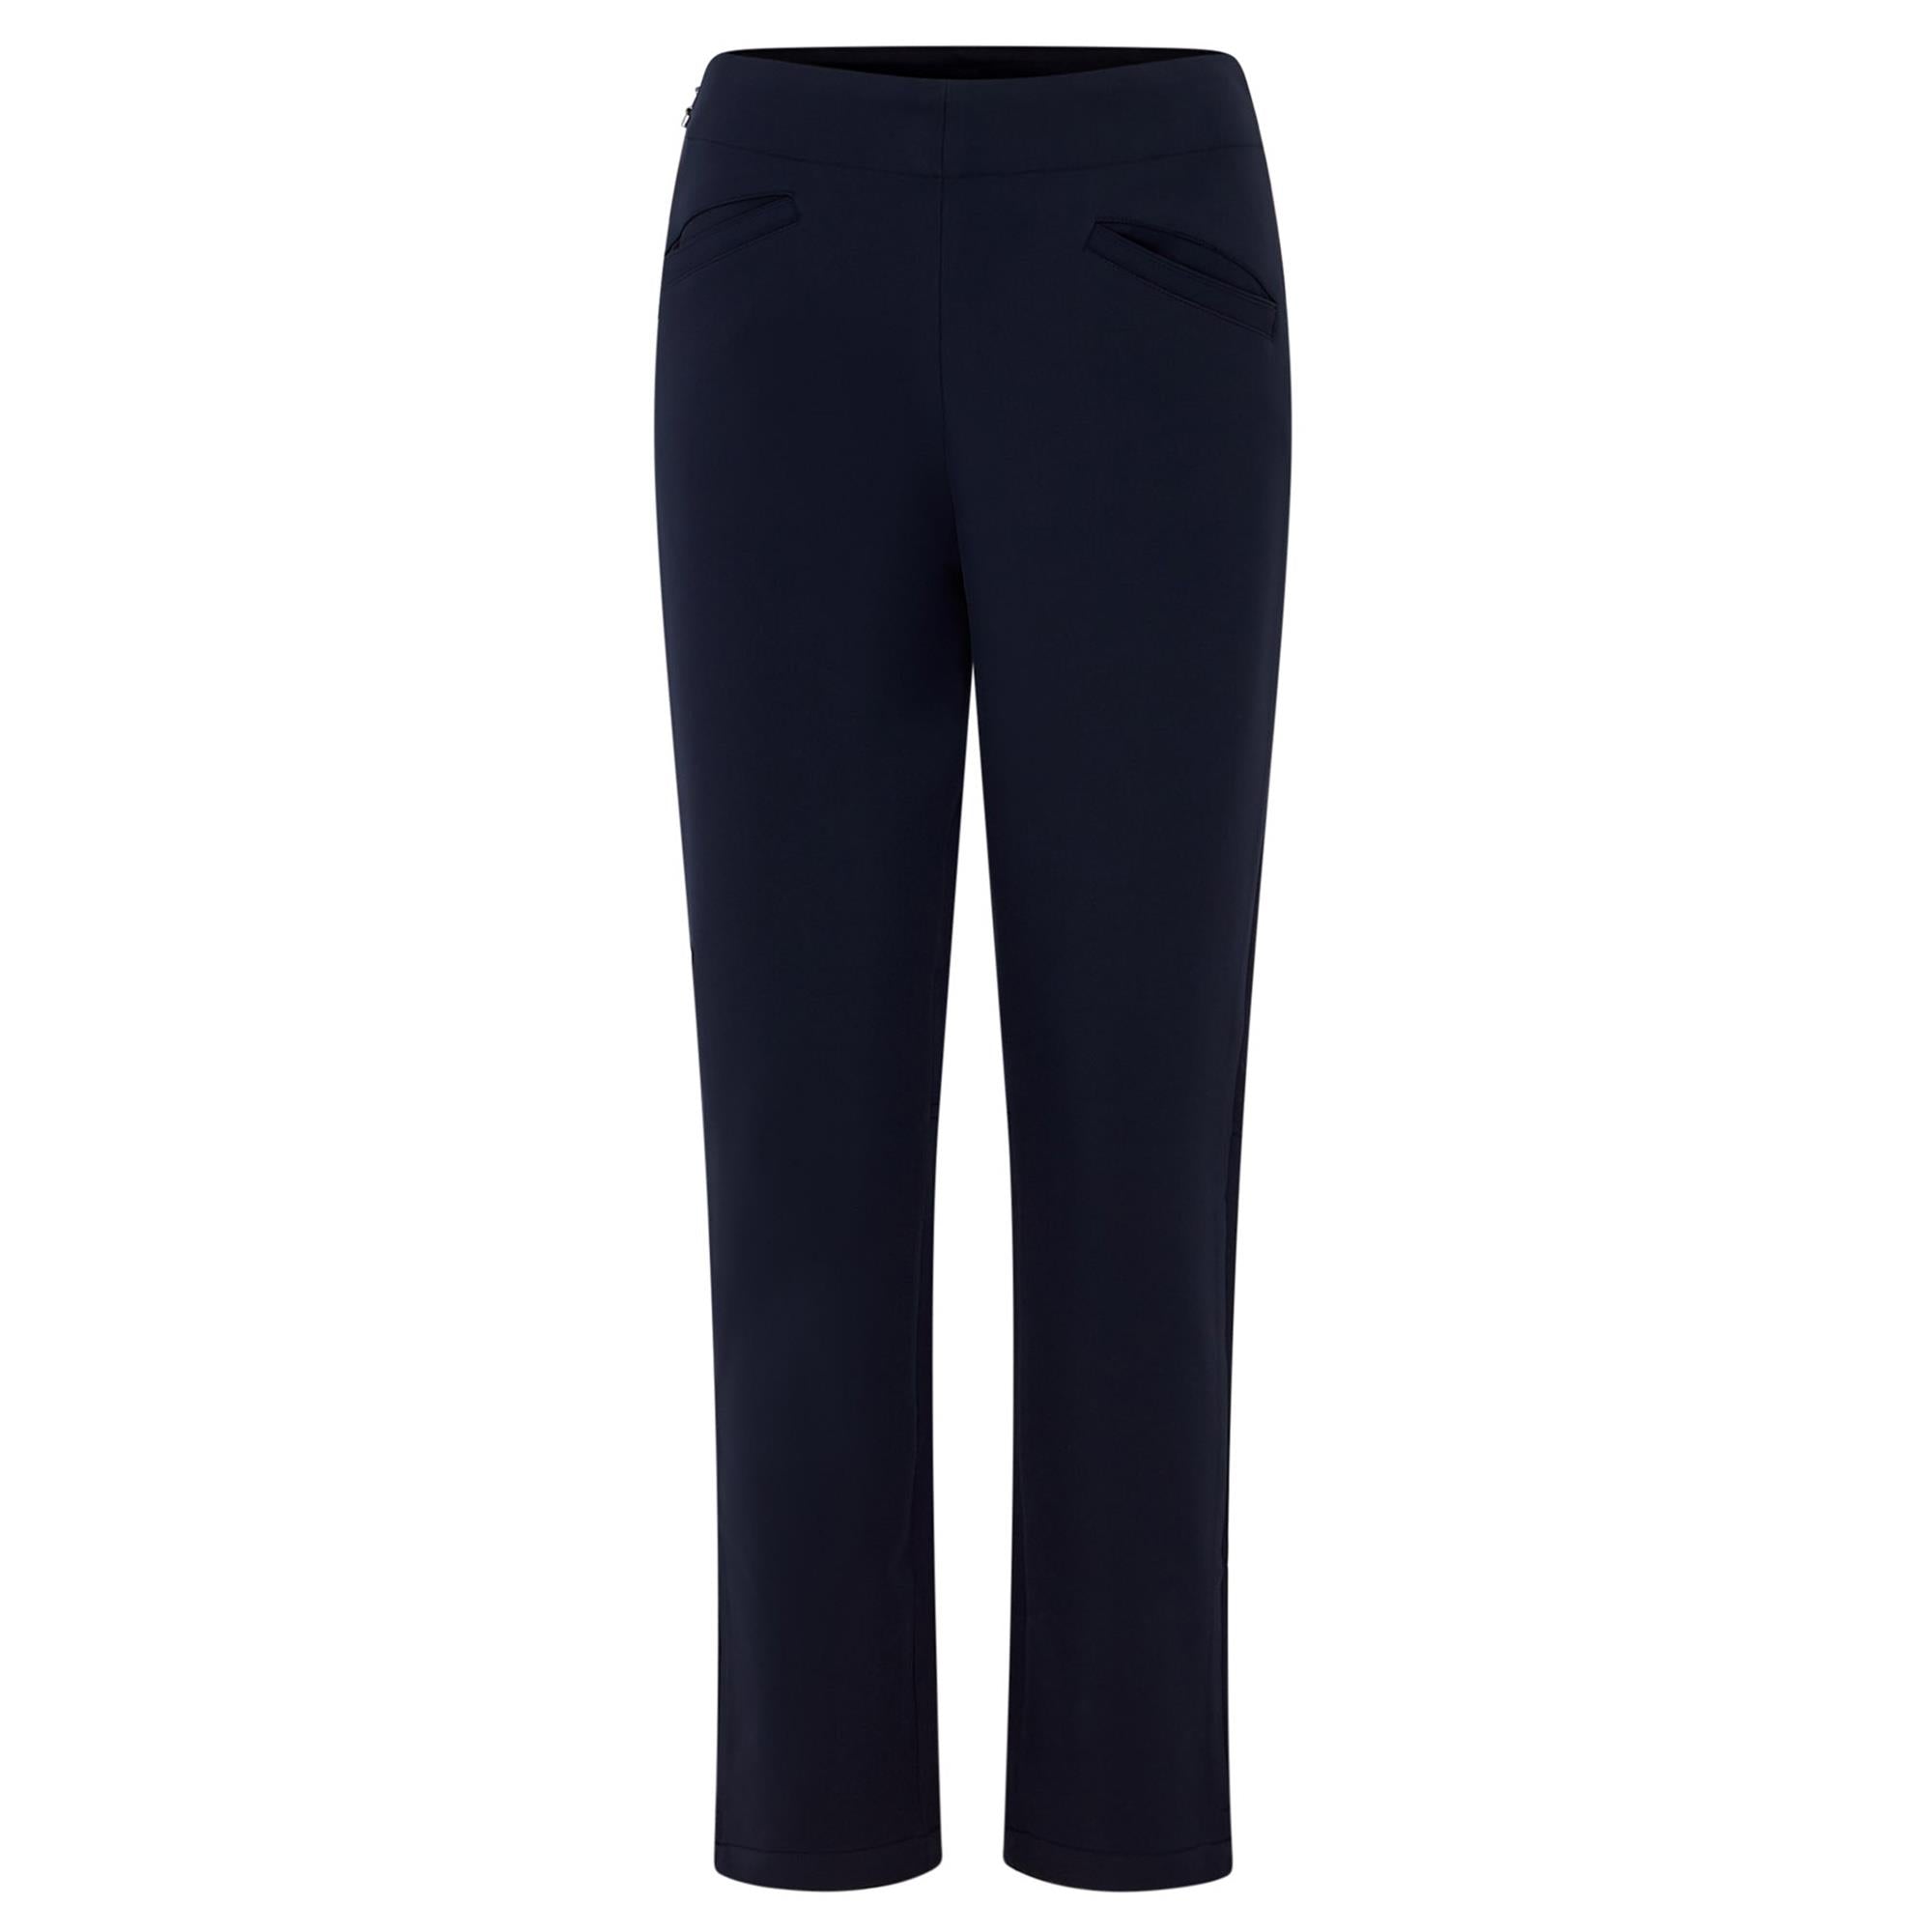 Swing Out Sister Core Pull On 7/8 Ladies Golf Trousers Navy